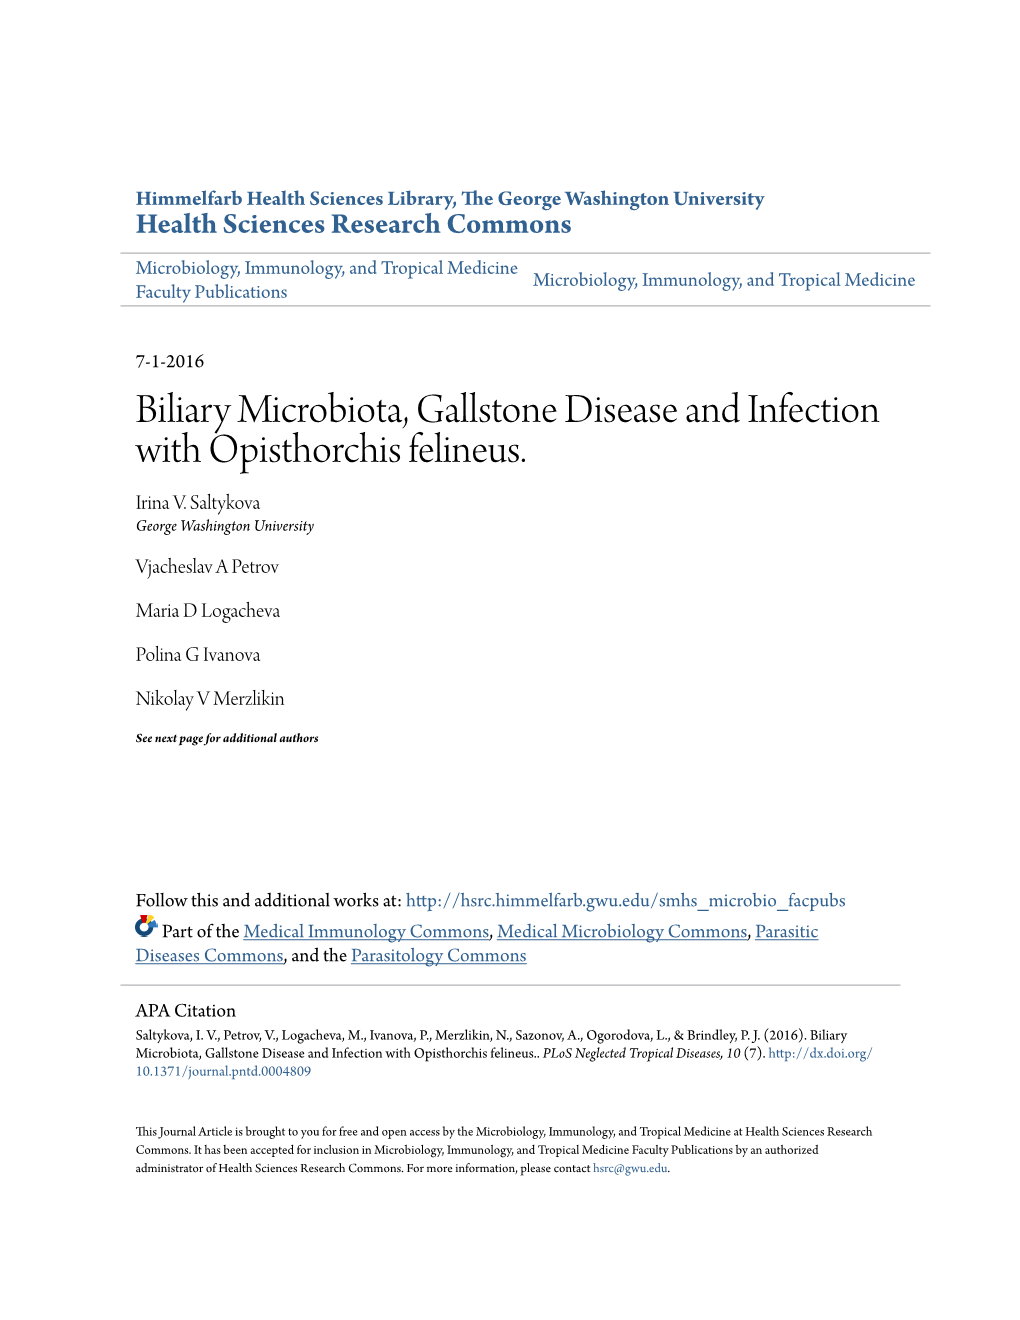 Biliary Microbiota, Gallstone Disease and Infection with Opisthorchis Felineus. Irina V